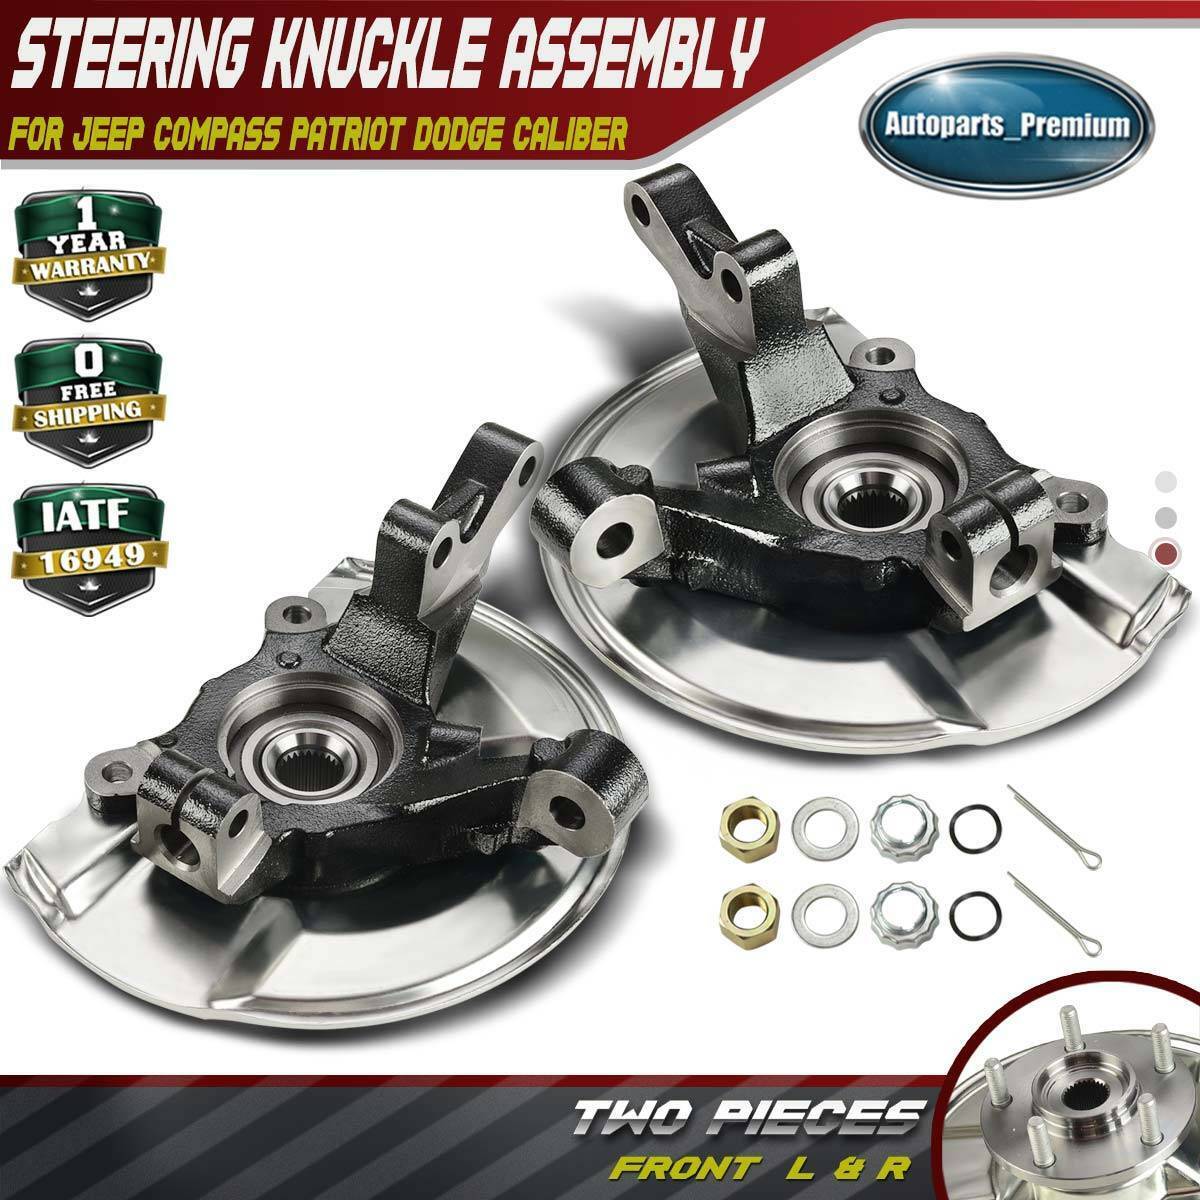 2x Front L&R Steering Knuckle&Wheel Hub Bearing Assembly for Dodge Jeep Patriot